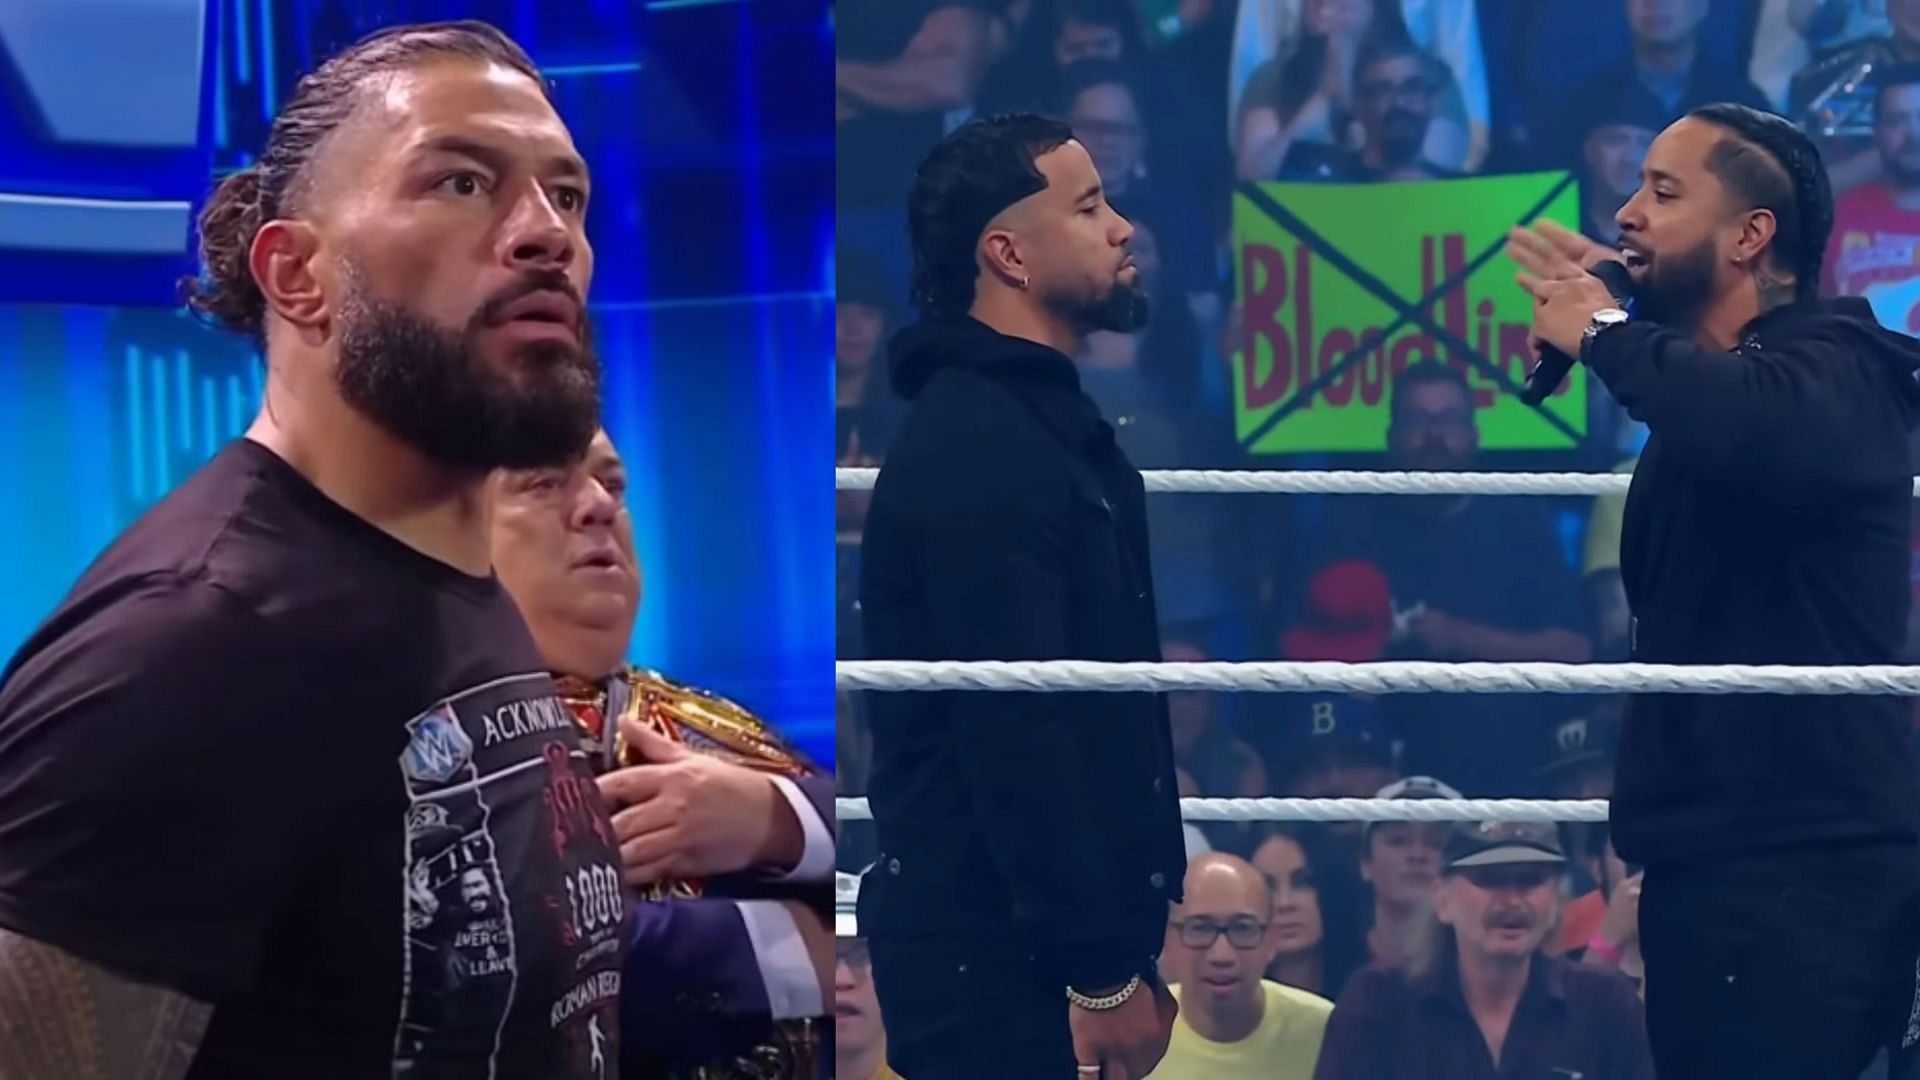 What will happen next in The Bloodline storyline on WWE SmackDown?